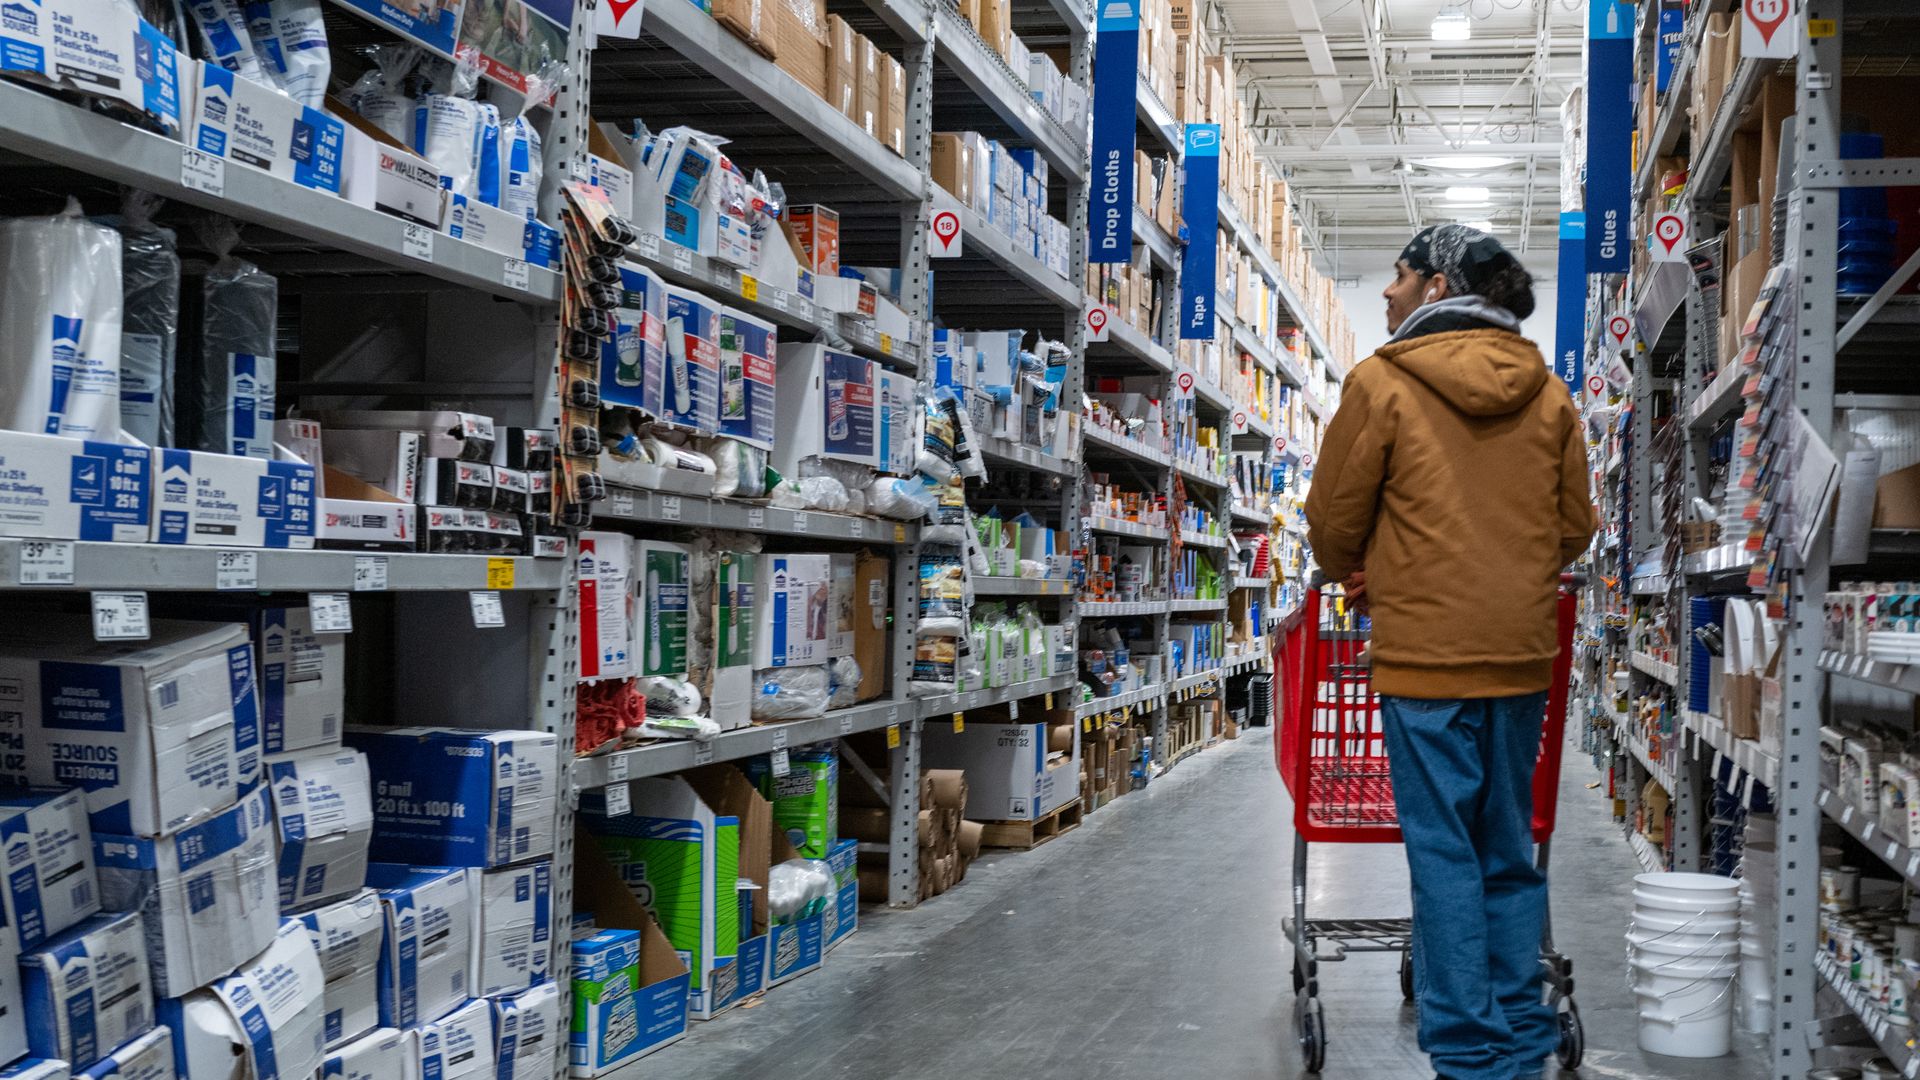 Shopper in aisle of a home improvement store